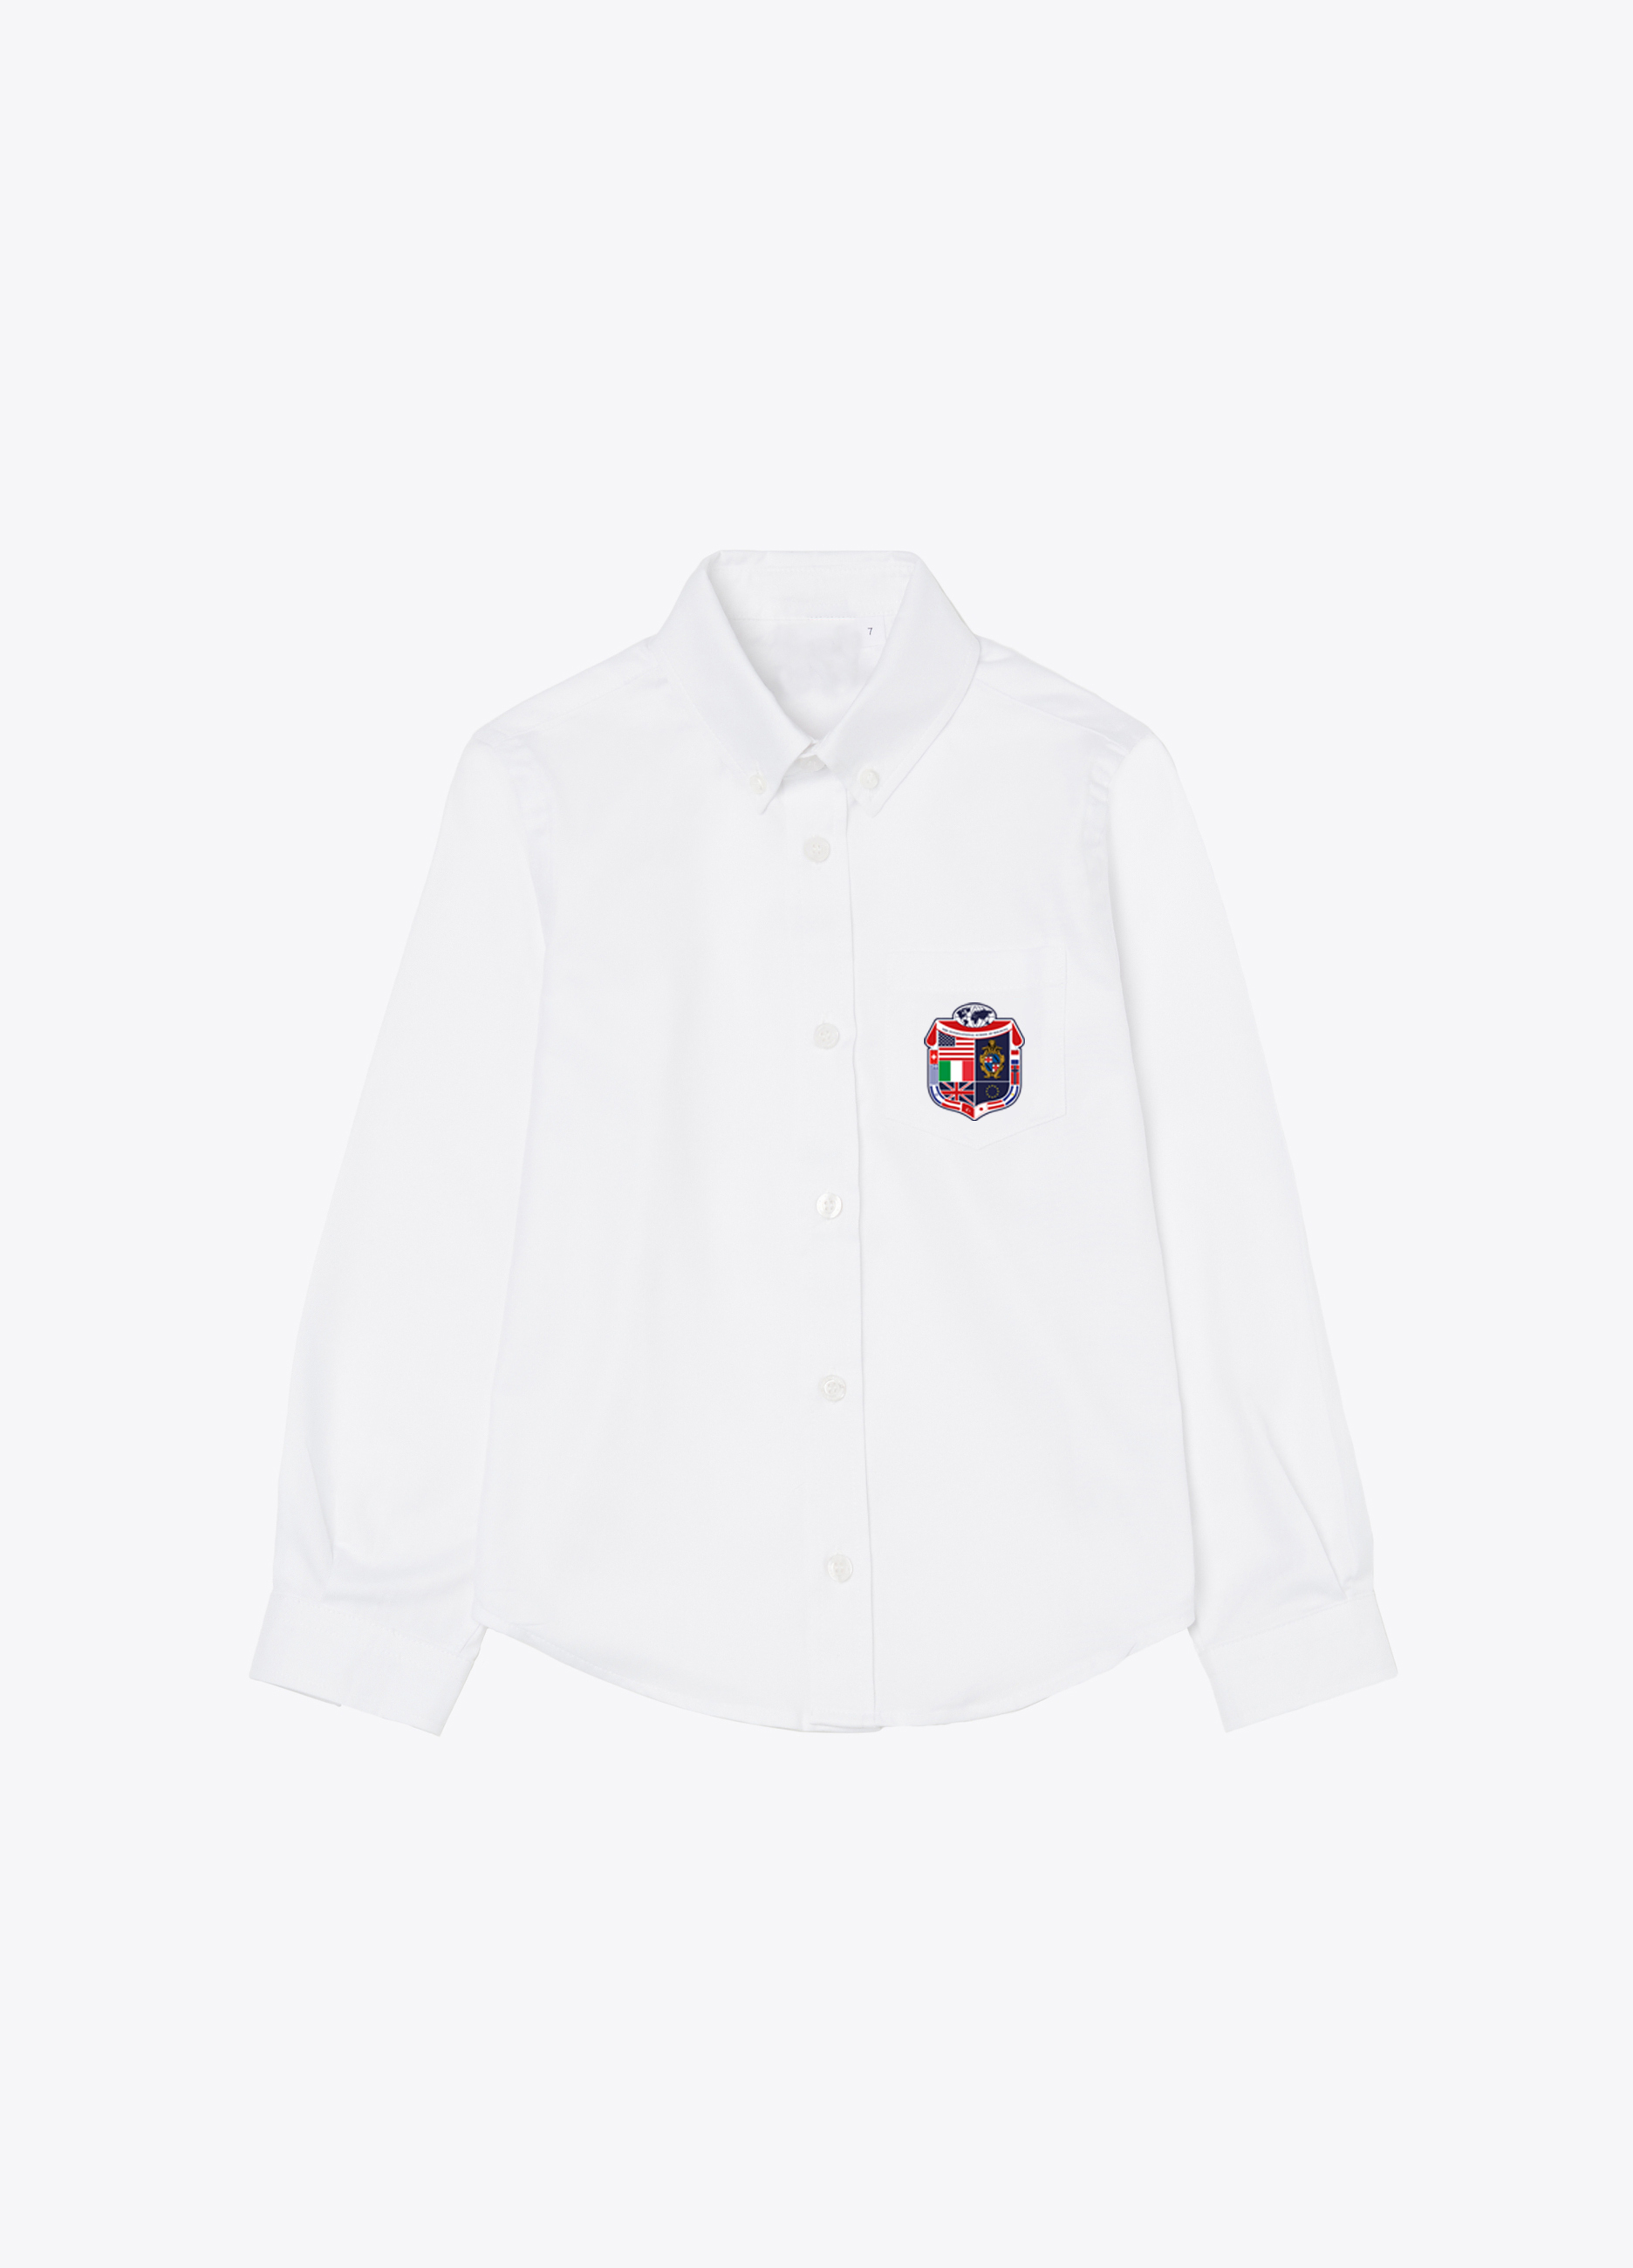 BOY - Cotton button-down shirt with embroidery.